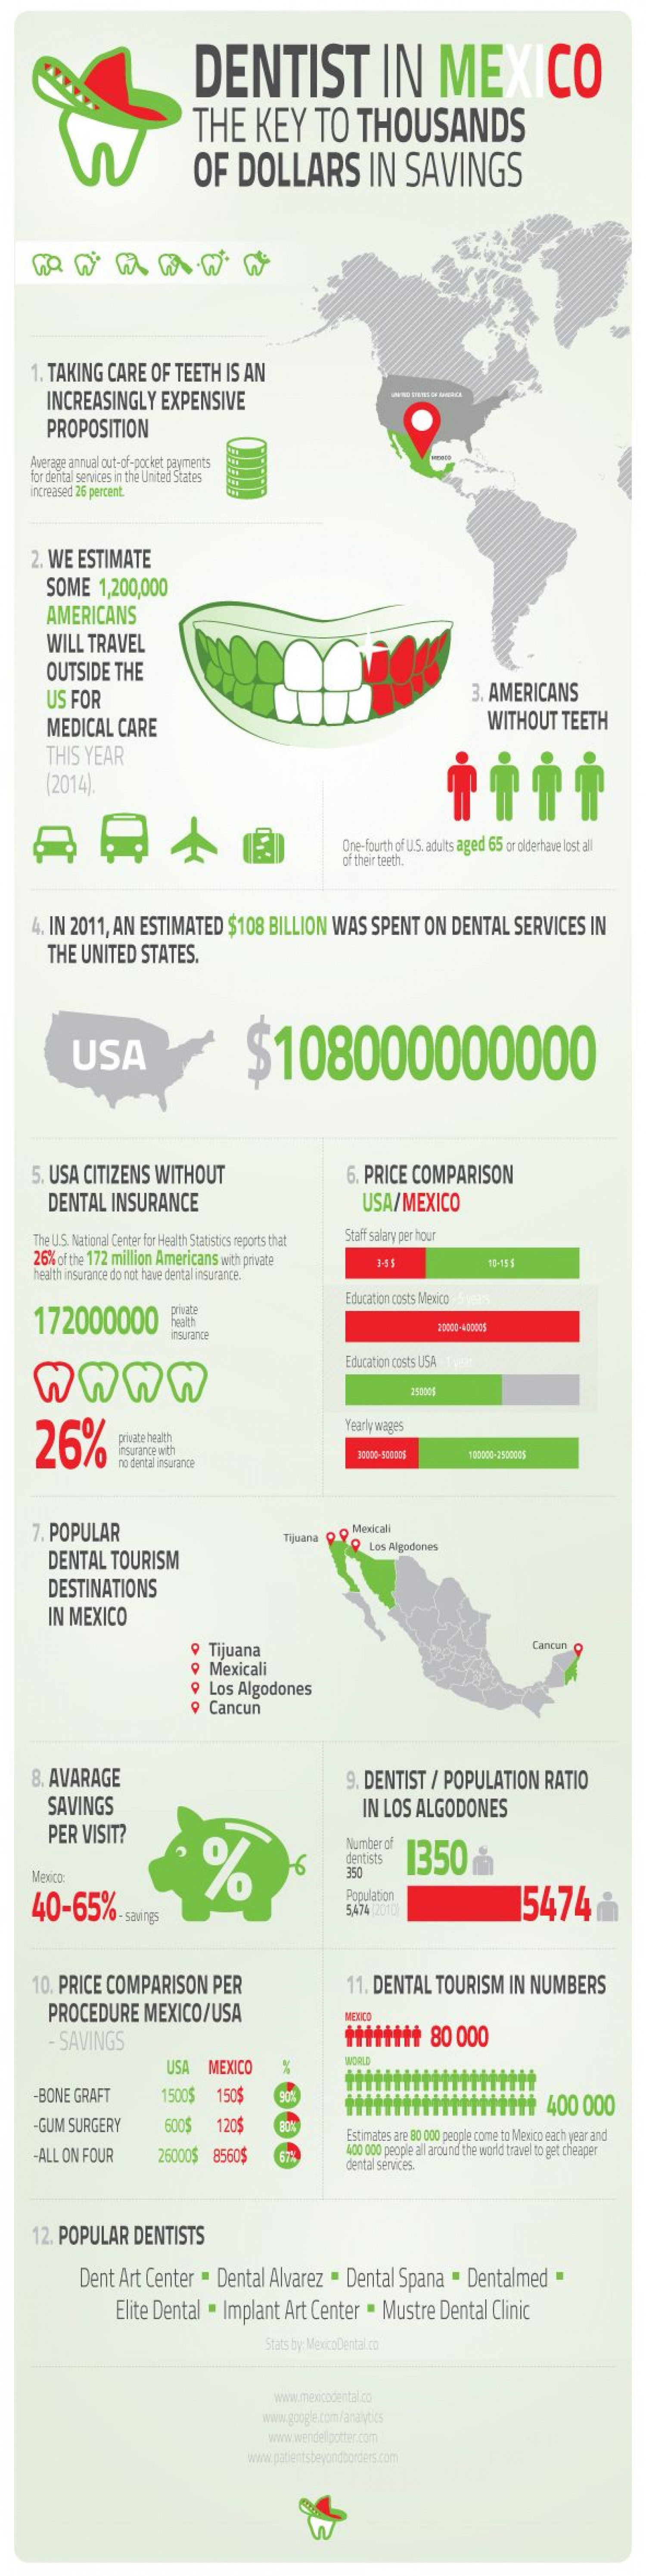 Dental Tourism in Mexico - Infographic Infographic